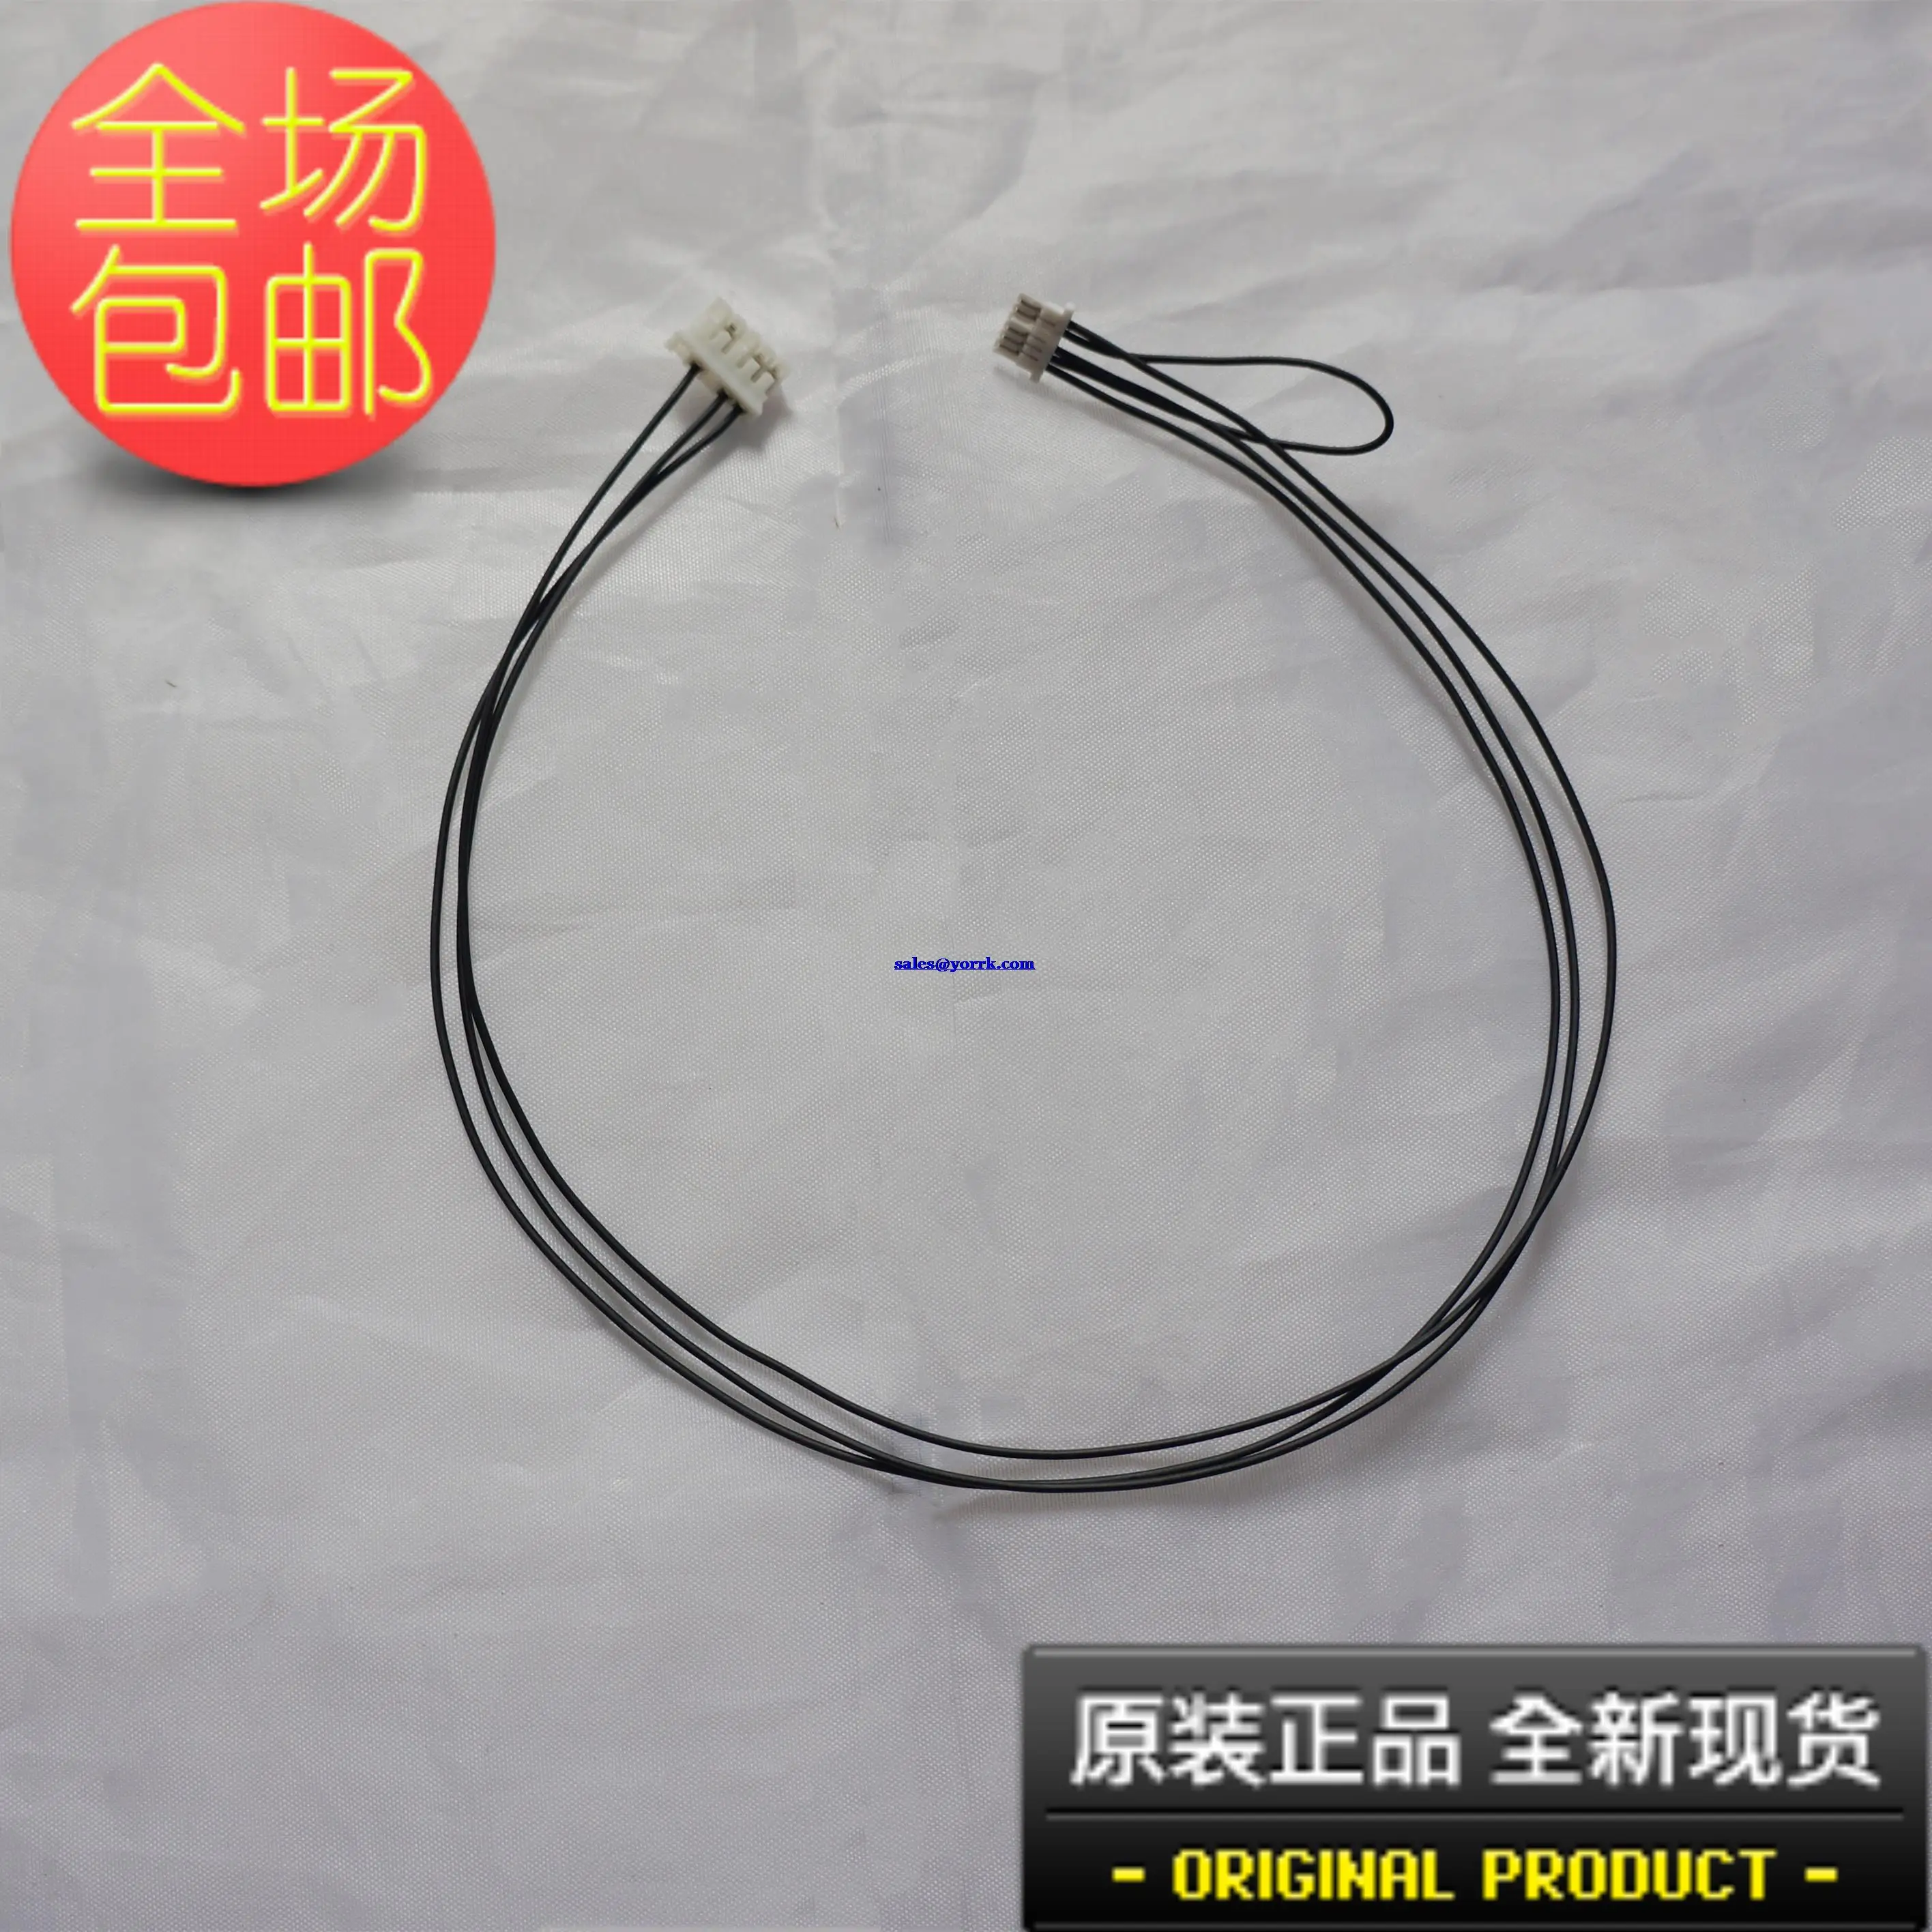 

639 b0126h01 display tube row line connection wire of power supply cord original quantum control system